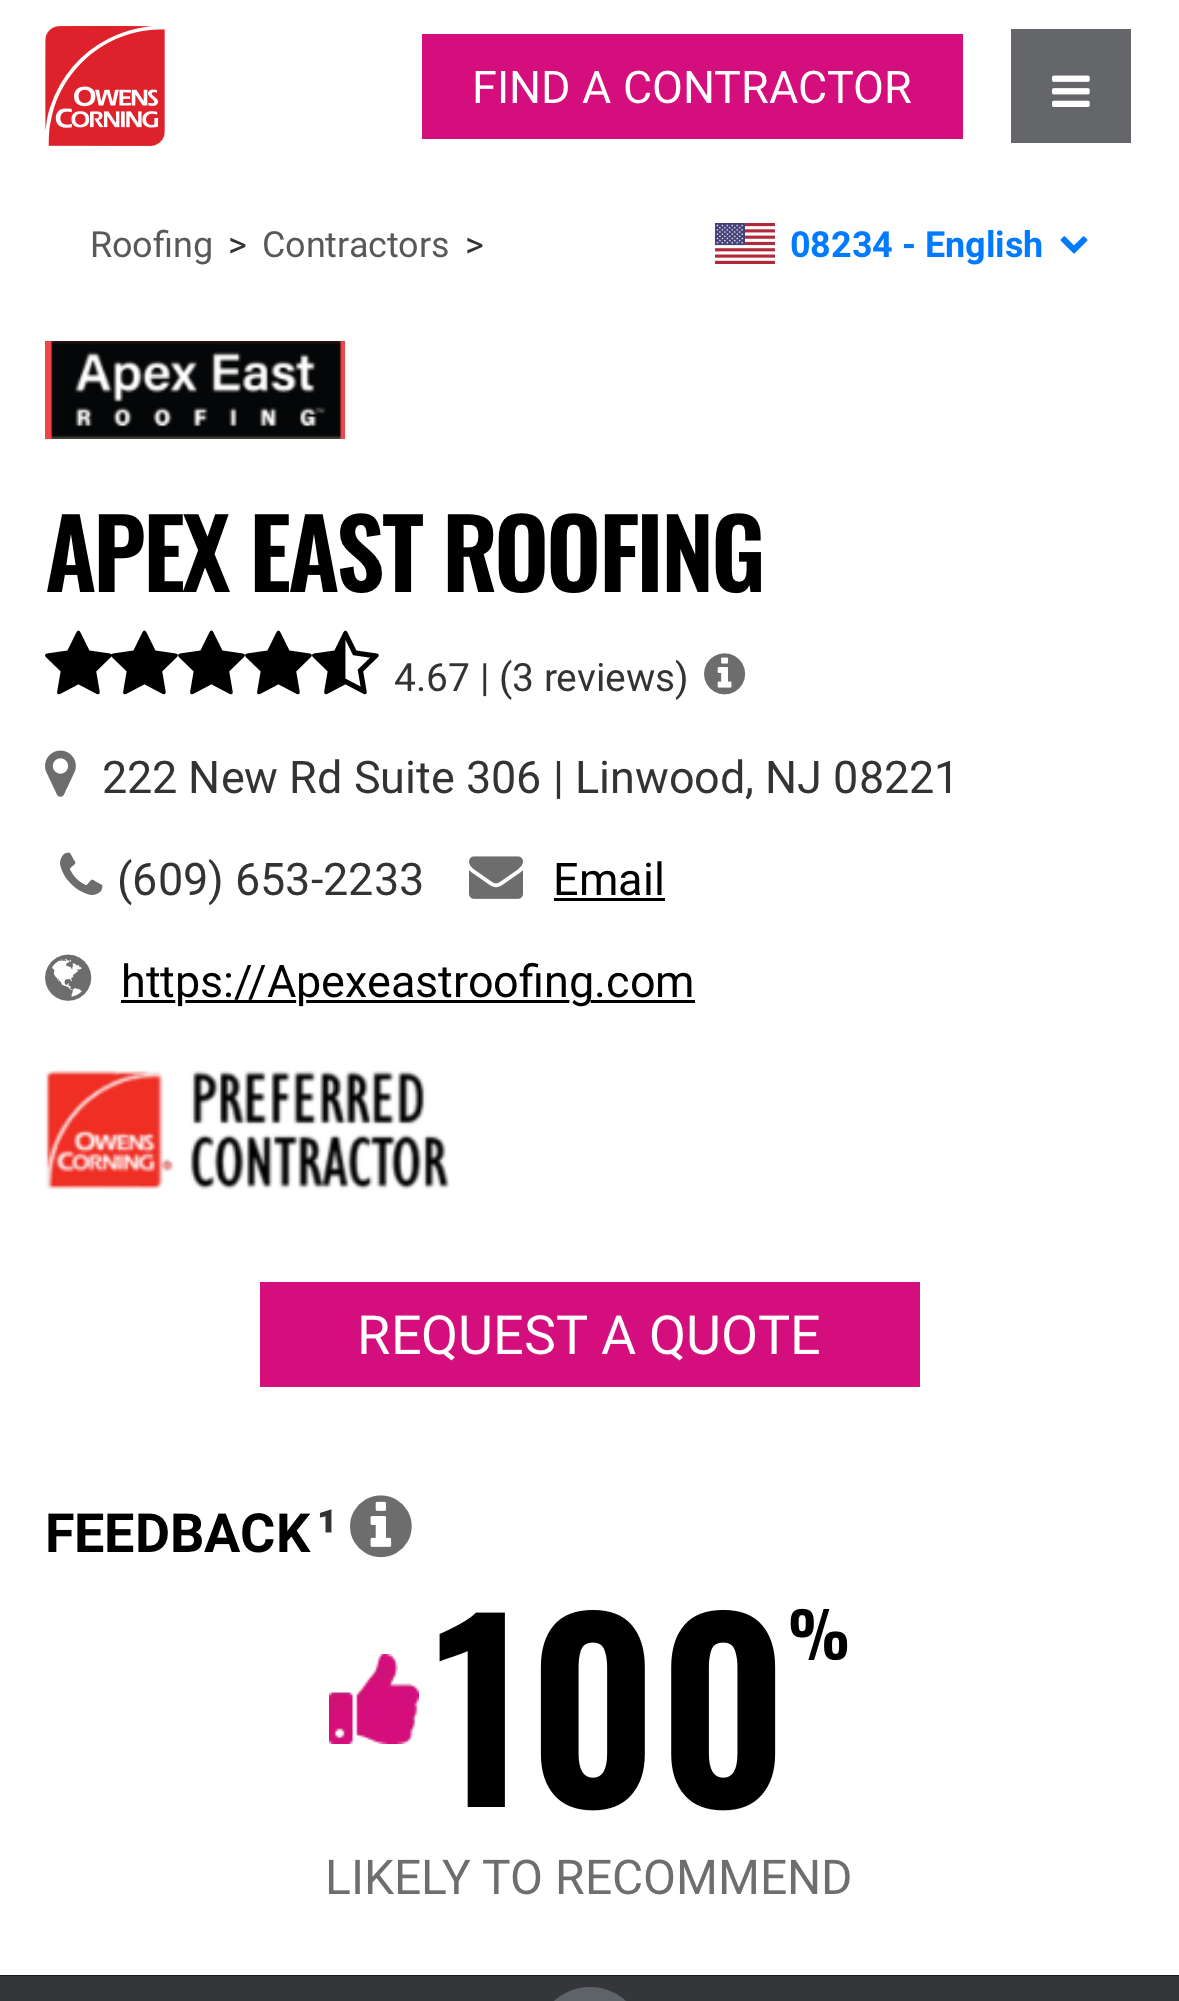 We Are An Owens Corning Preferred Contractor